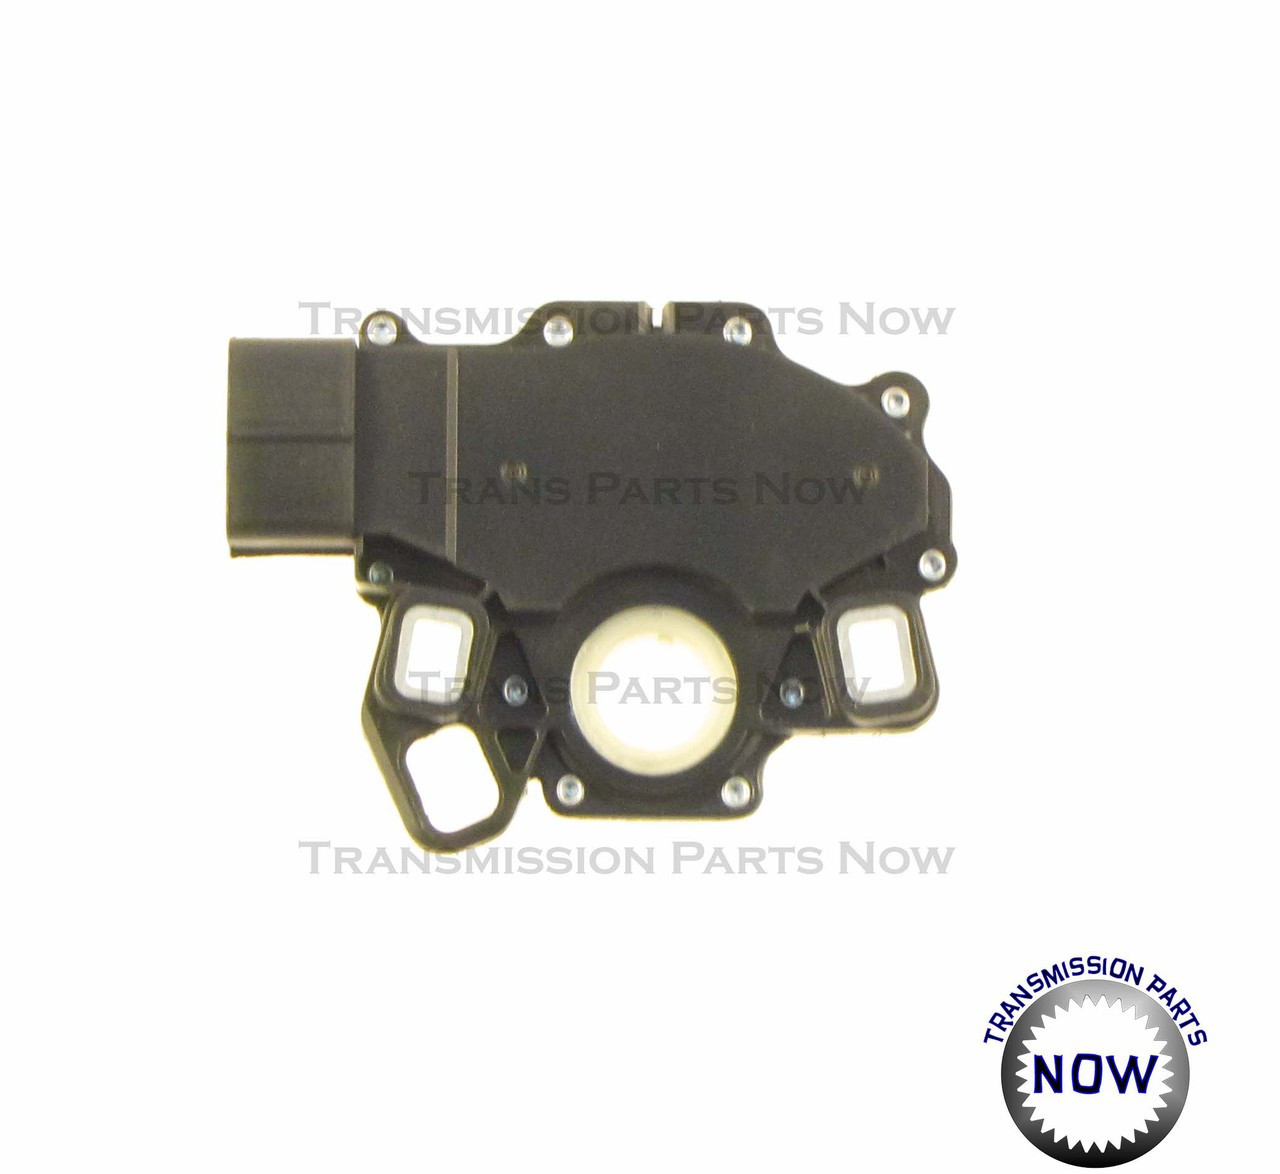 Transmission range switch, TRS switch, PRNDL switch, neutral safety switch, Starter switch.This fits 5R55W/S transmission 1997 and up also 4R70W transmissions 1998 - up.This is the 11 pin design and replaces the 12 pin design. 76410EA, F7LA-7F293AB. transmission parts